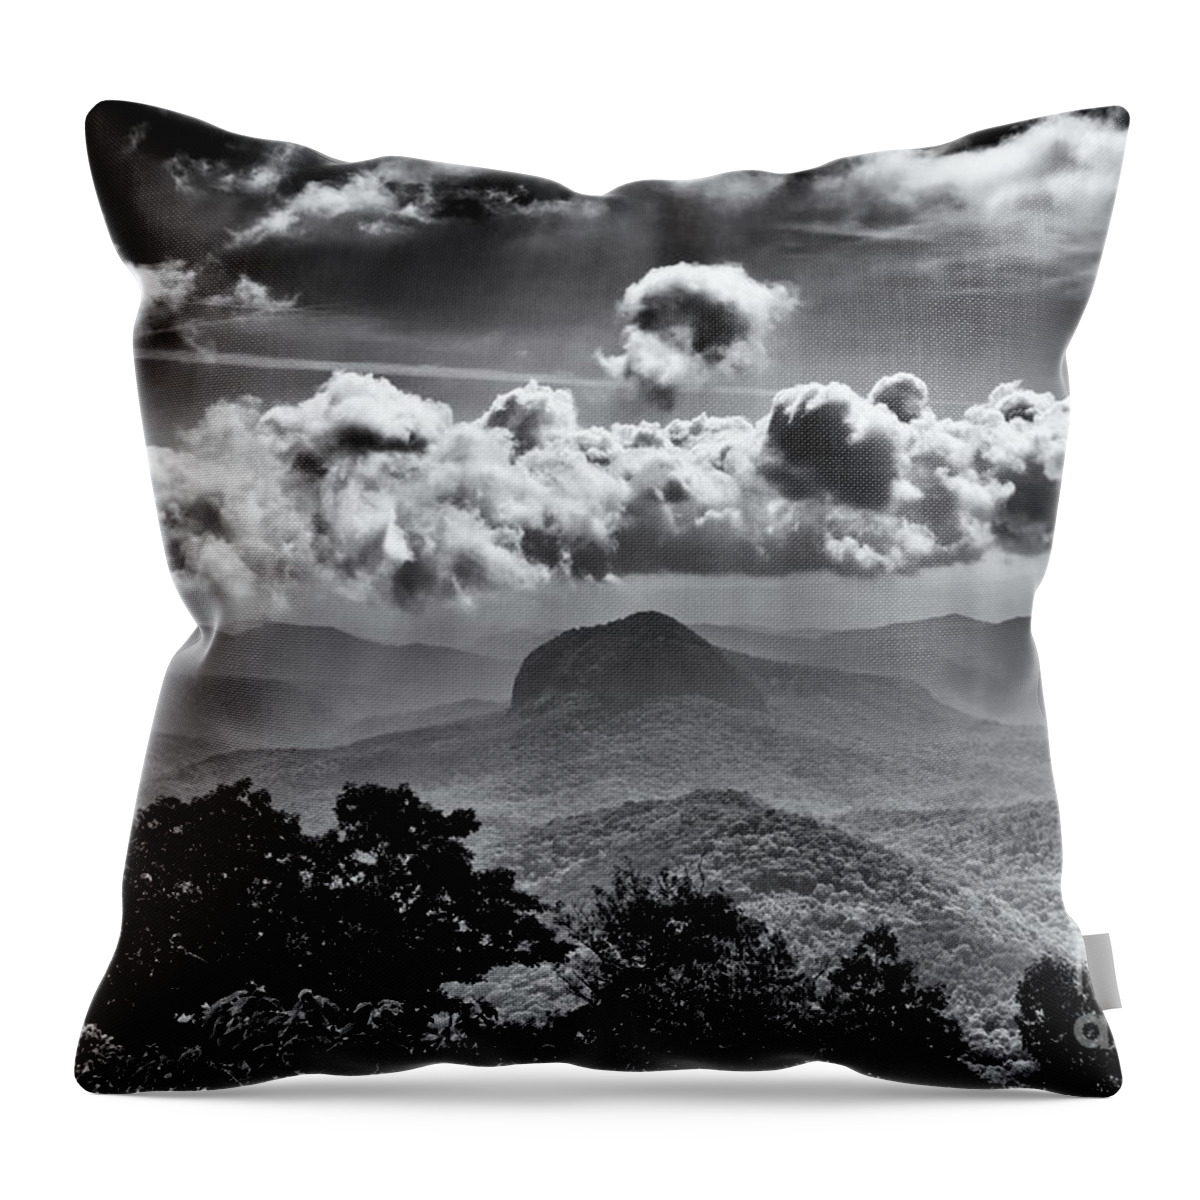 Looking Glass Rock Throw Pillow featuring the photograph Looking Glass Rock 8 by Phil Perkins